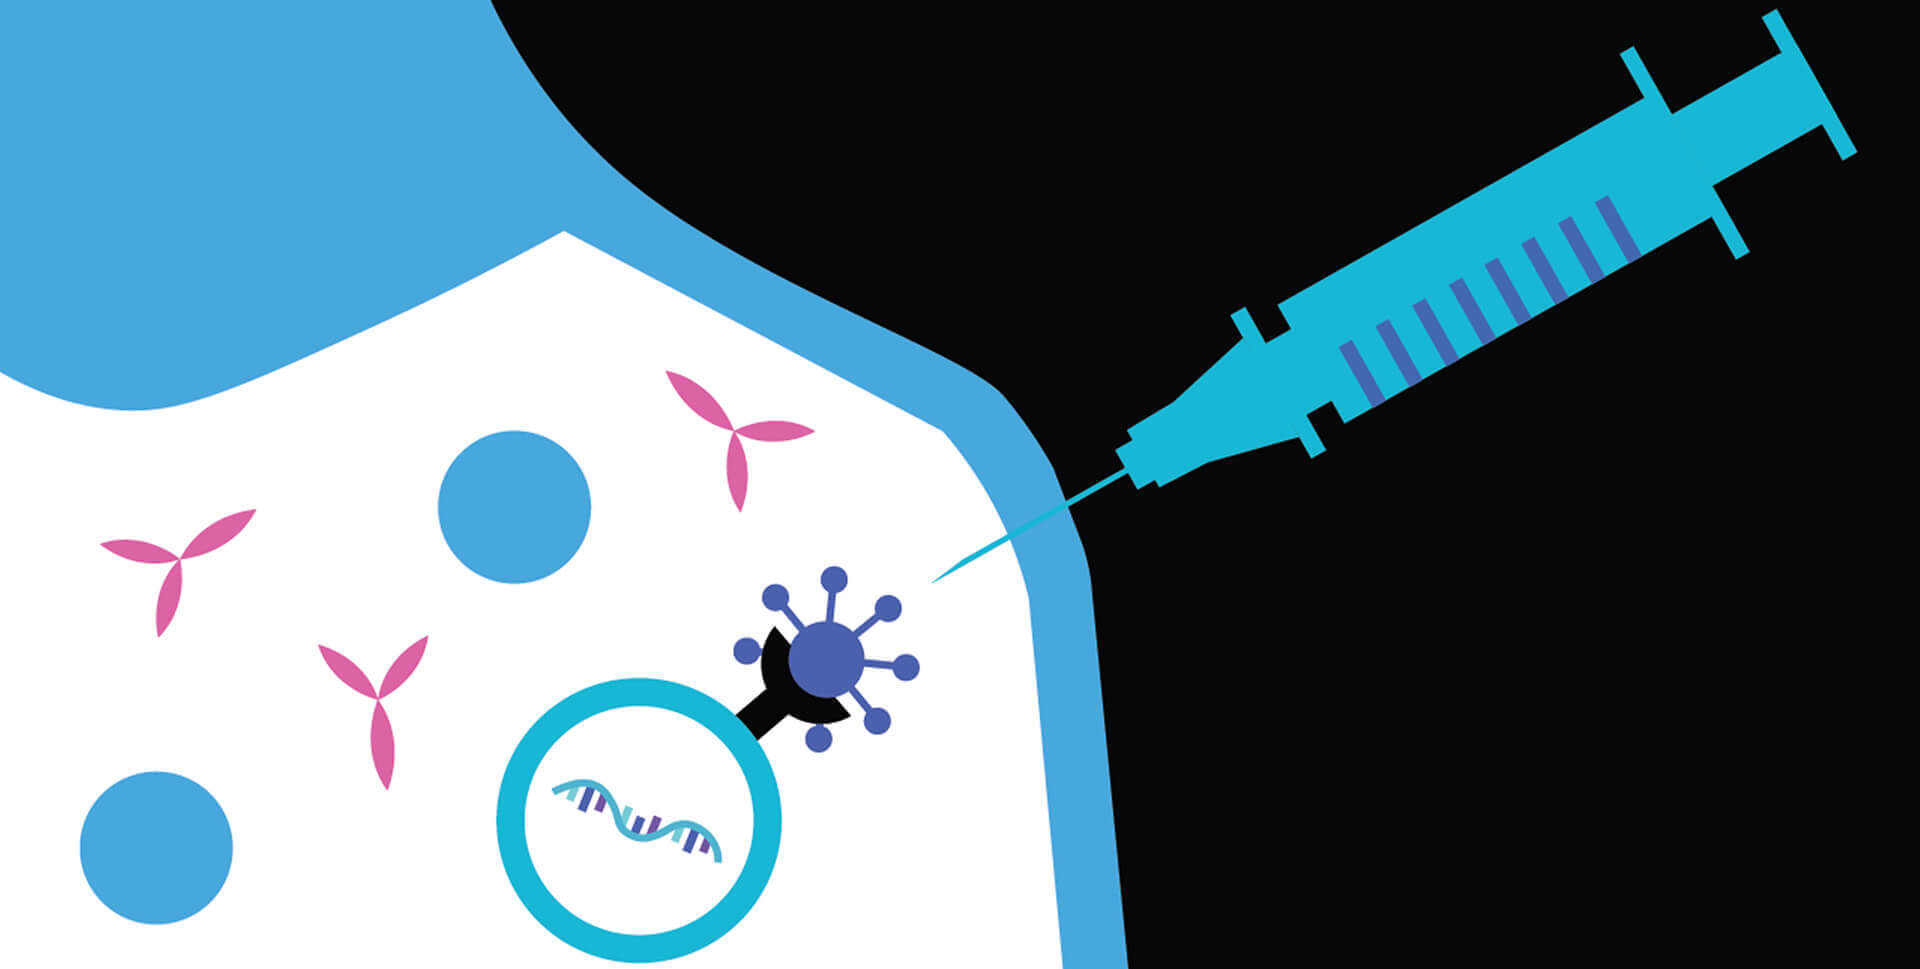 What Makes an RNA Vaccine Different From a Conventional Vaccine?